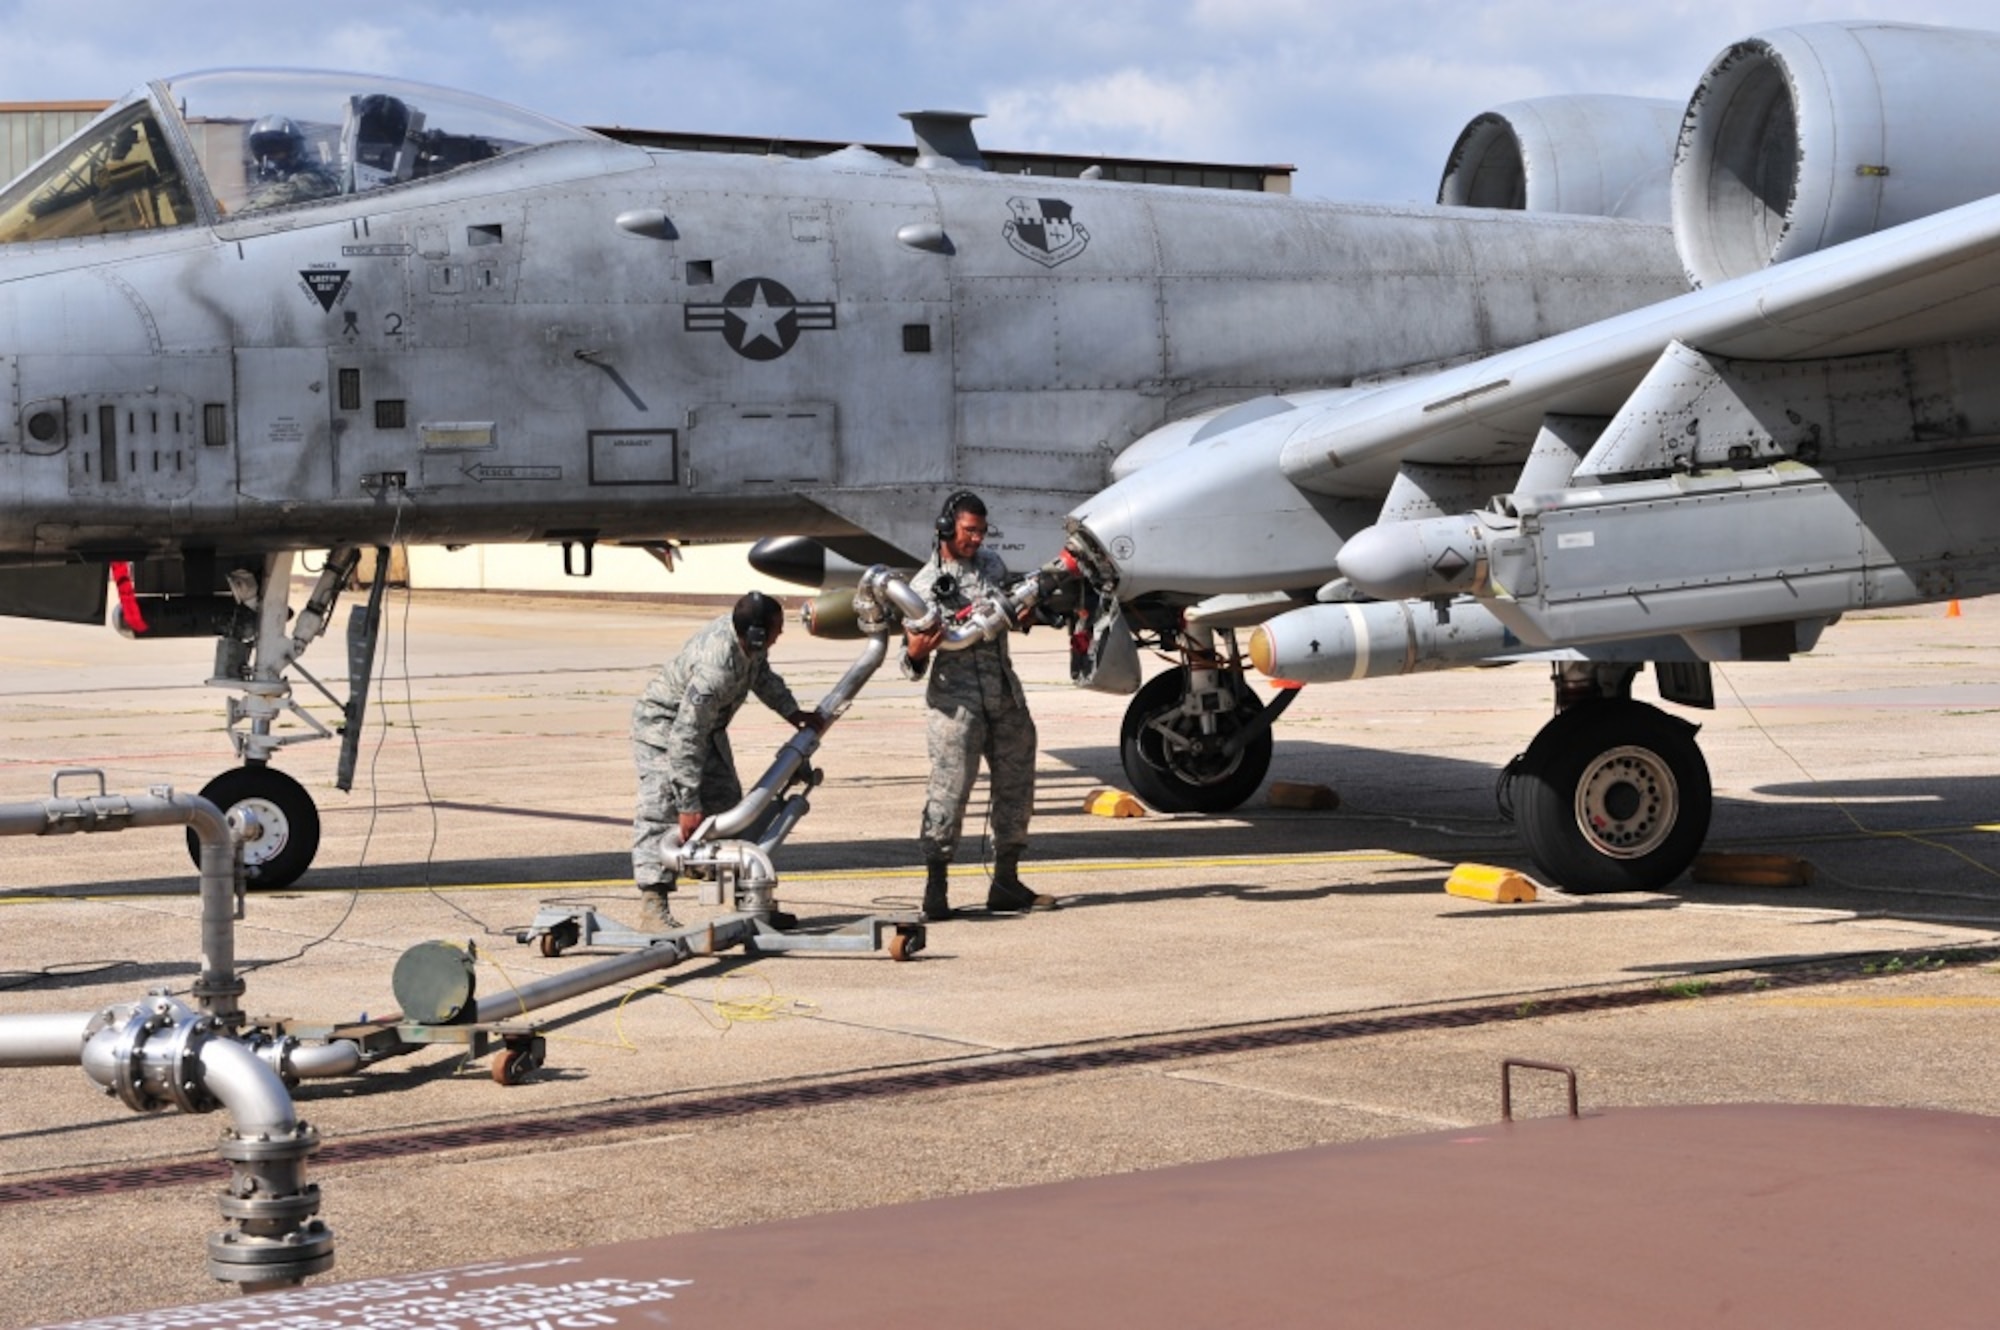 Airmen connect a jet fuel hose to an A-10 Thunderbolt II aircraft during a hot pit refueling at Spangdahlem Air Base, Germany.